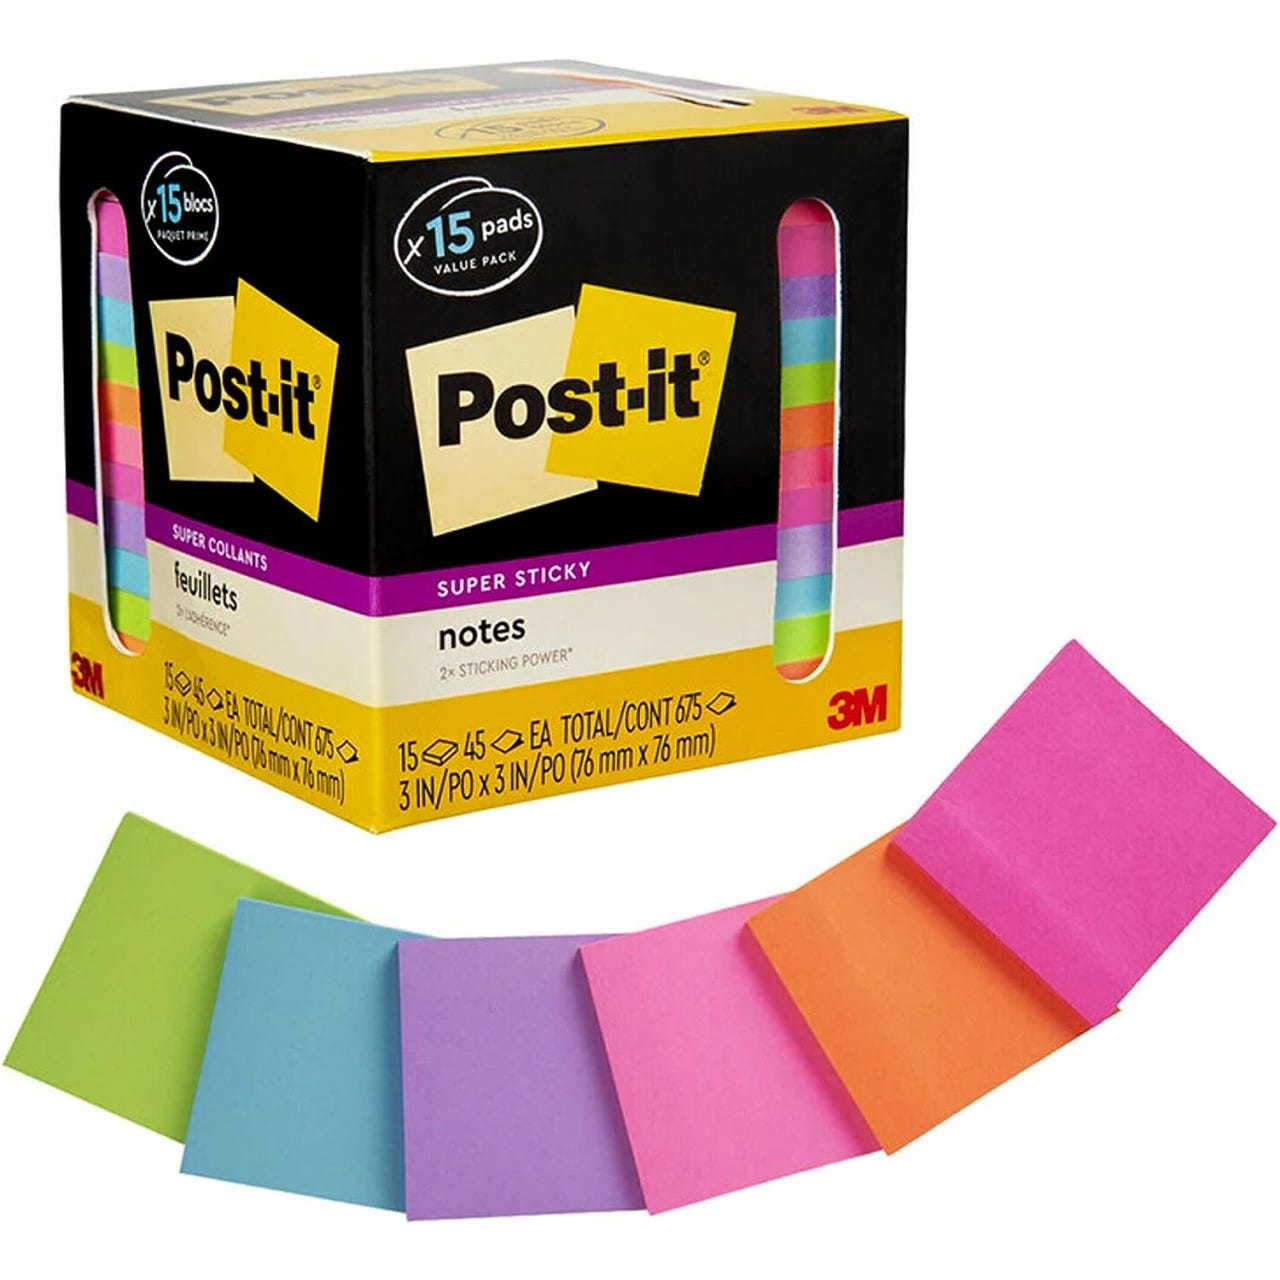 Lined Sticky Notes 4x6 in Bright Ruled Post Stickies Colorful Super Sticking Power Memo Pads Its Strong Adhesive 6 Pads/Pack 45 Sheets/Pad